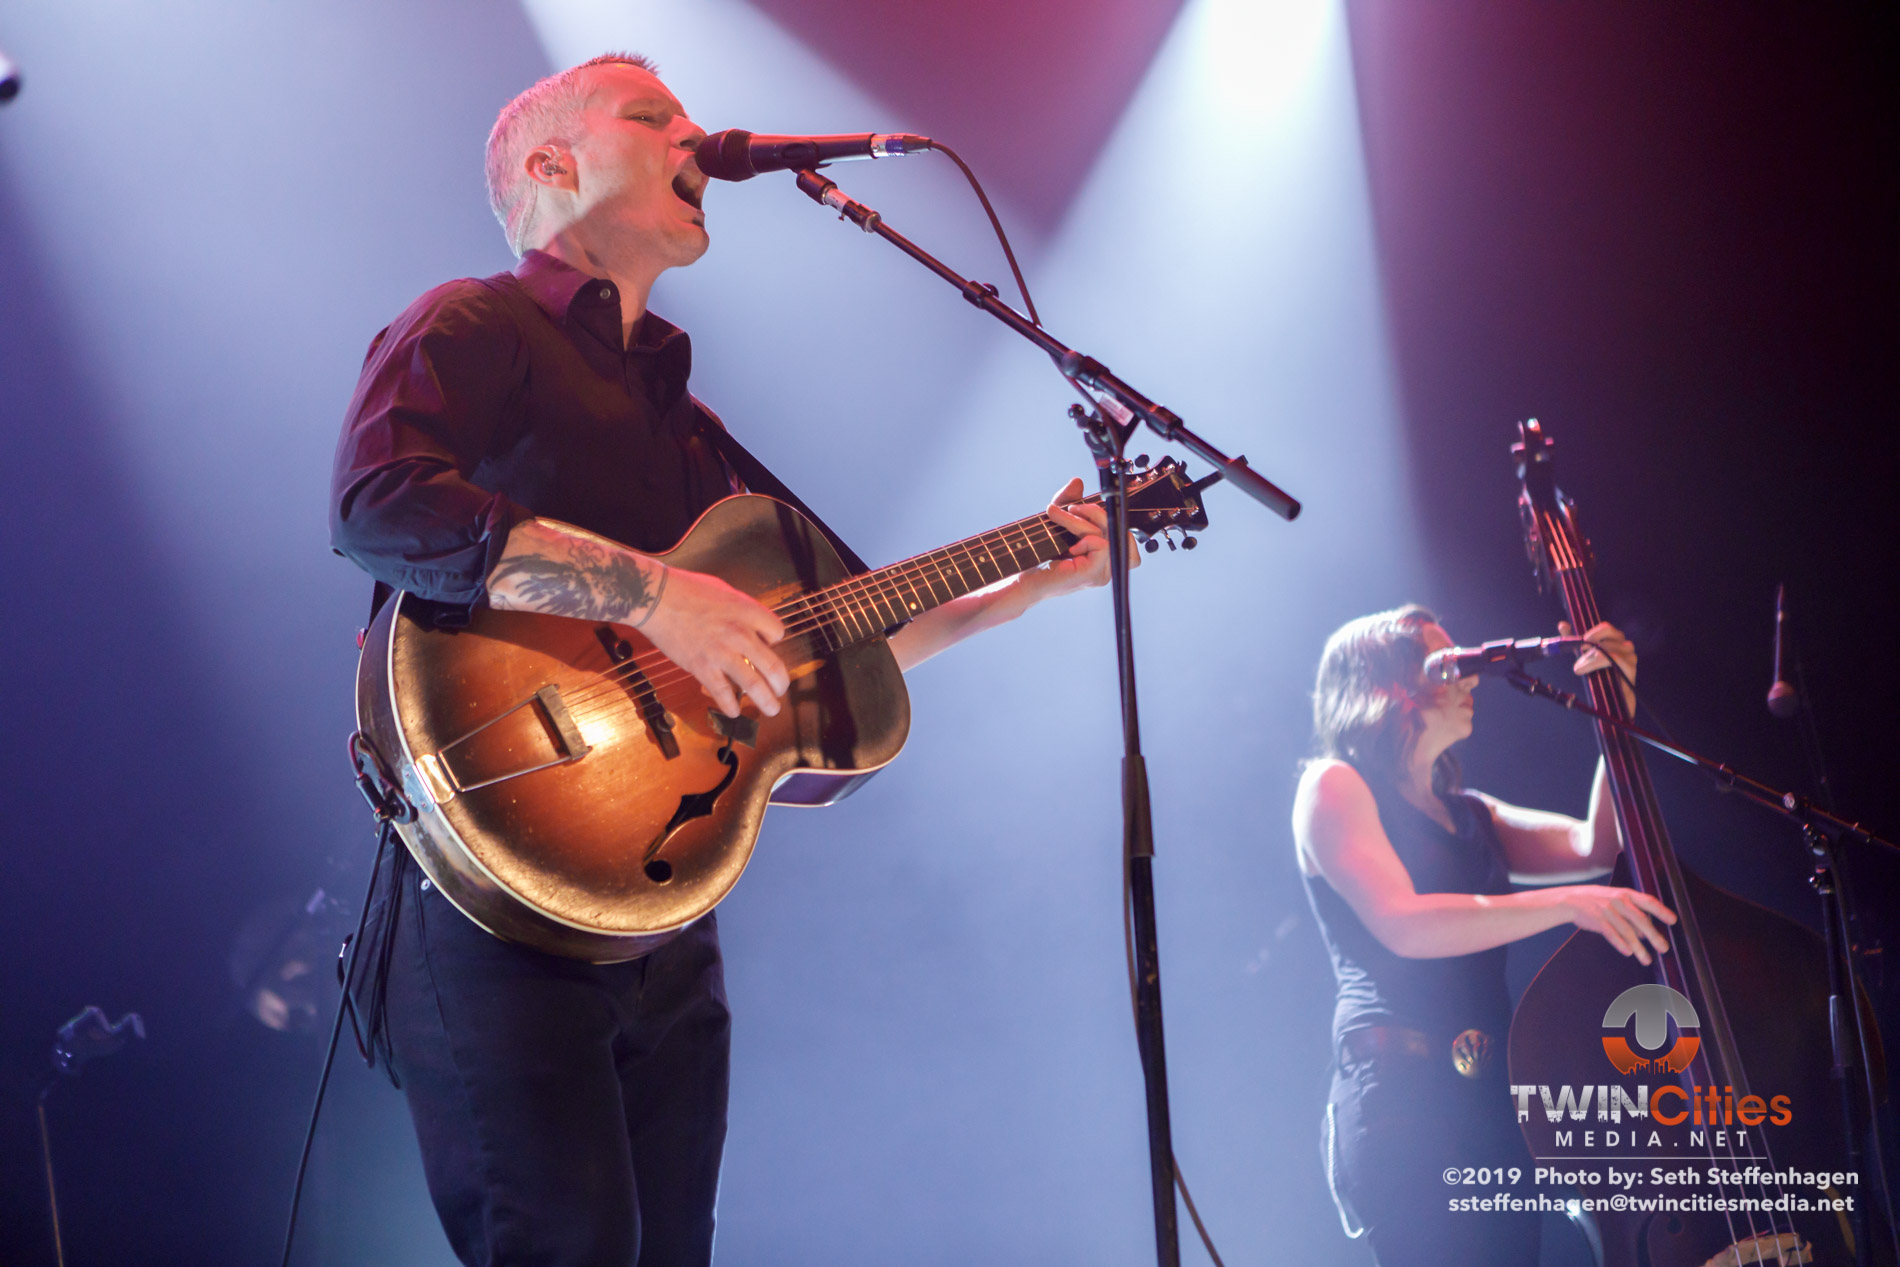 February 1, 2019 - Minneapolis, Minnesota, United States - The Devil Makes Three live in concert at First Avenue along with Lost Dog Street Band as the opener.(Photo by Seth Steffenhagen/Steffenhagen Photography)